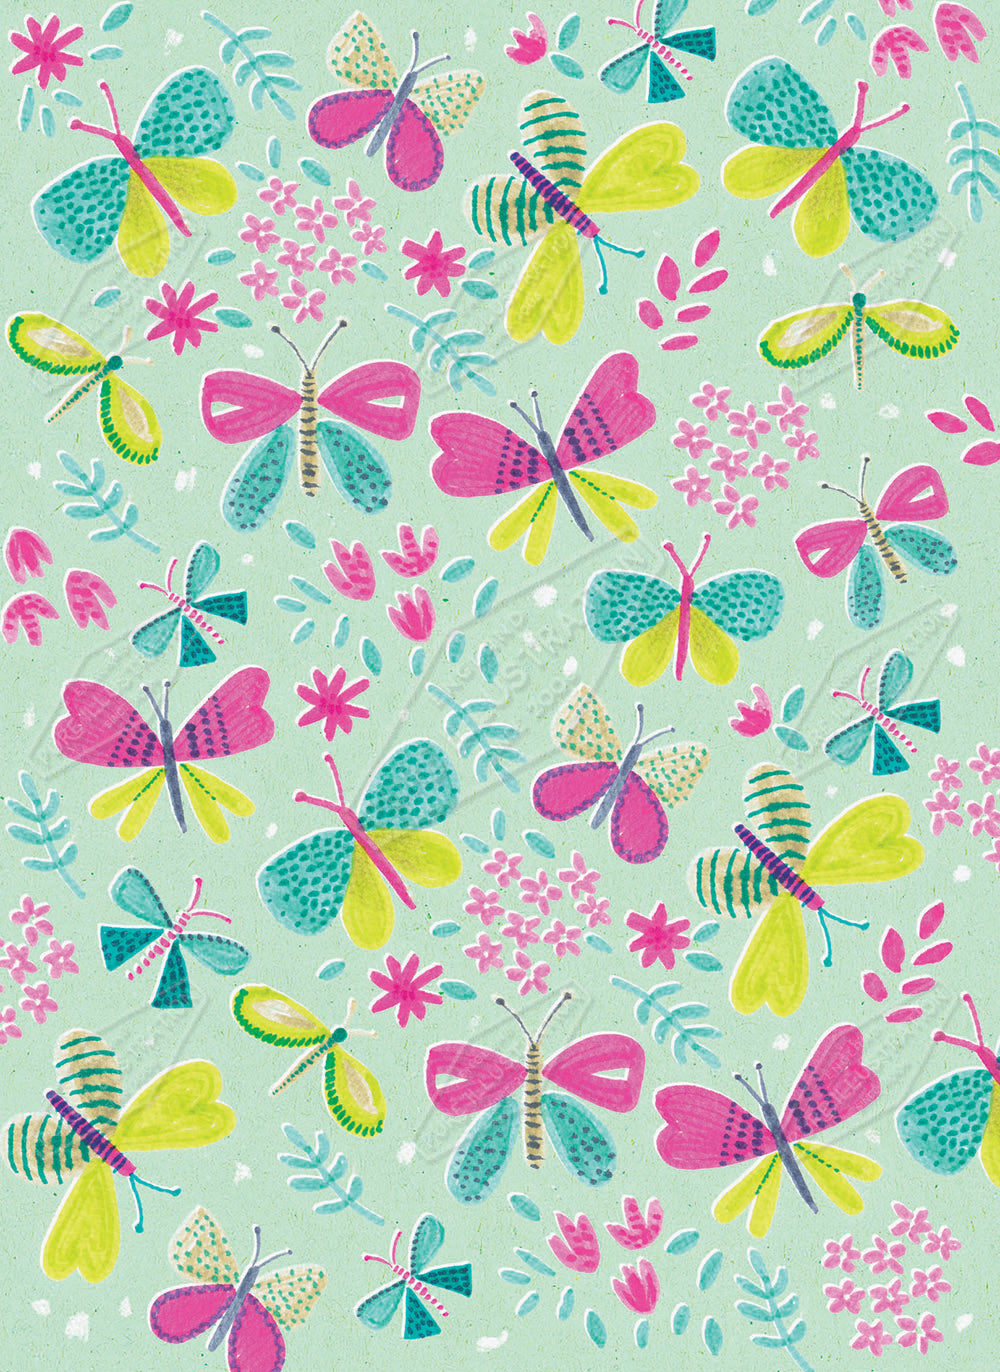 00033637SLA- Sarah Lake is represented by Pure Art Licensing Agency - Everyday Pattern Design